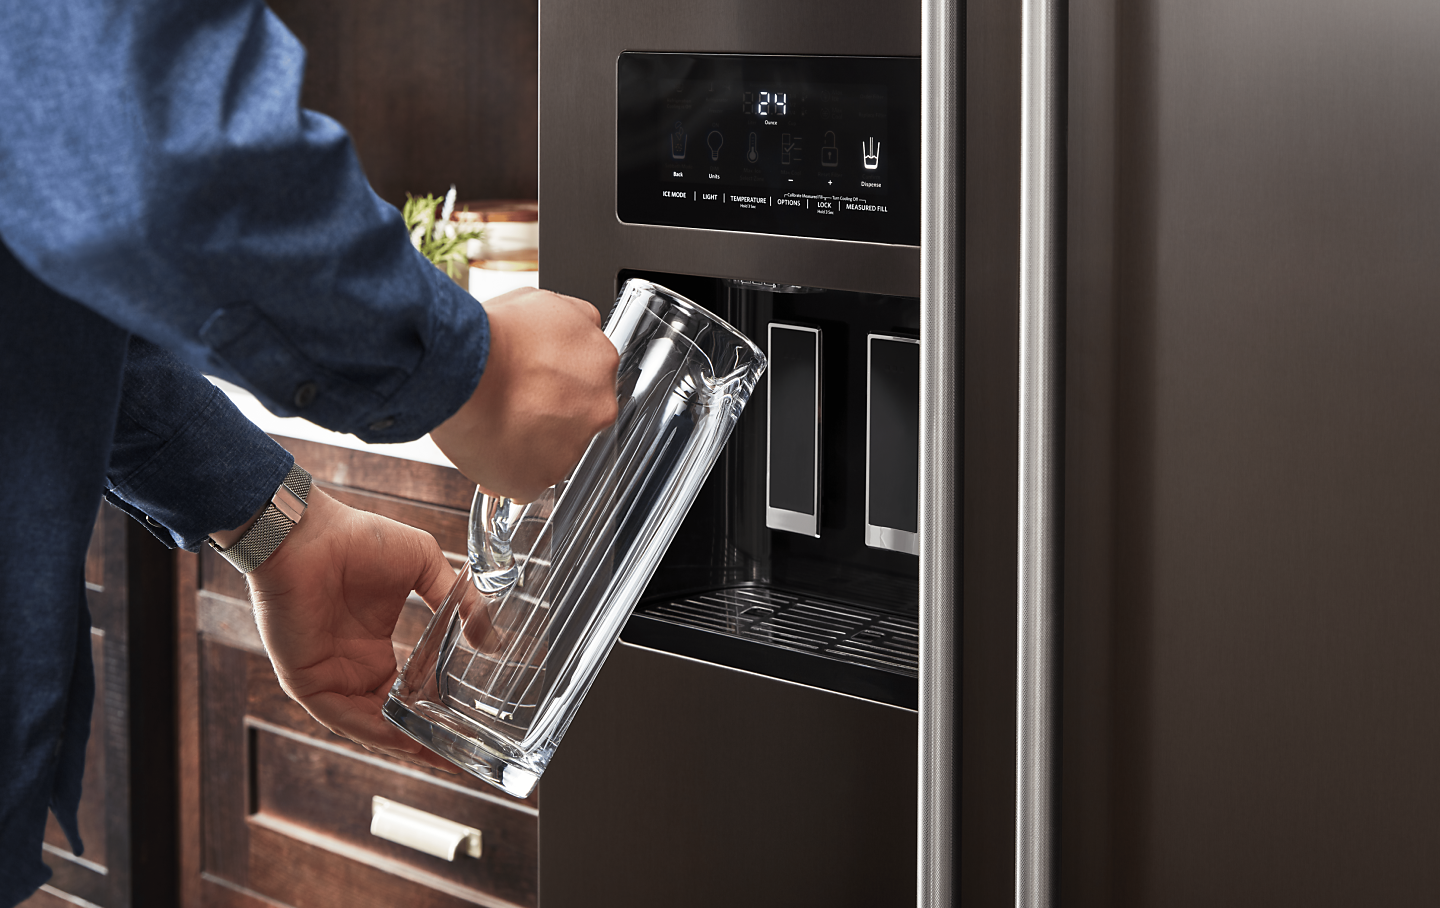 Person filling a pitcher at the refrigerator water dispenser